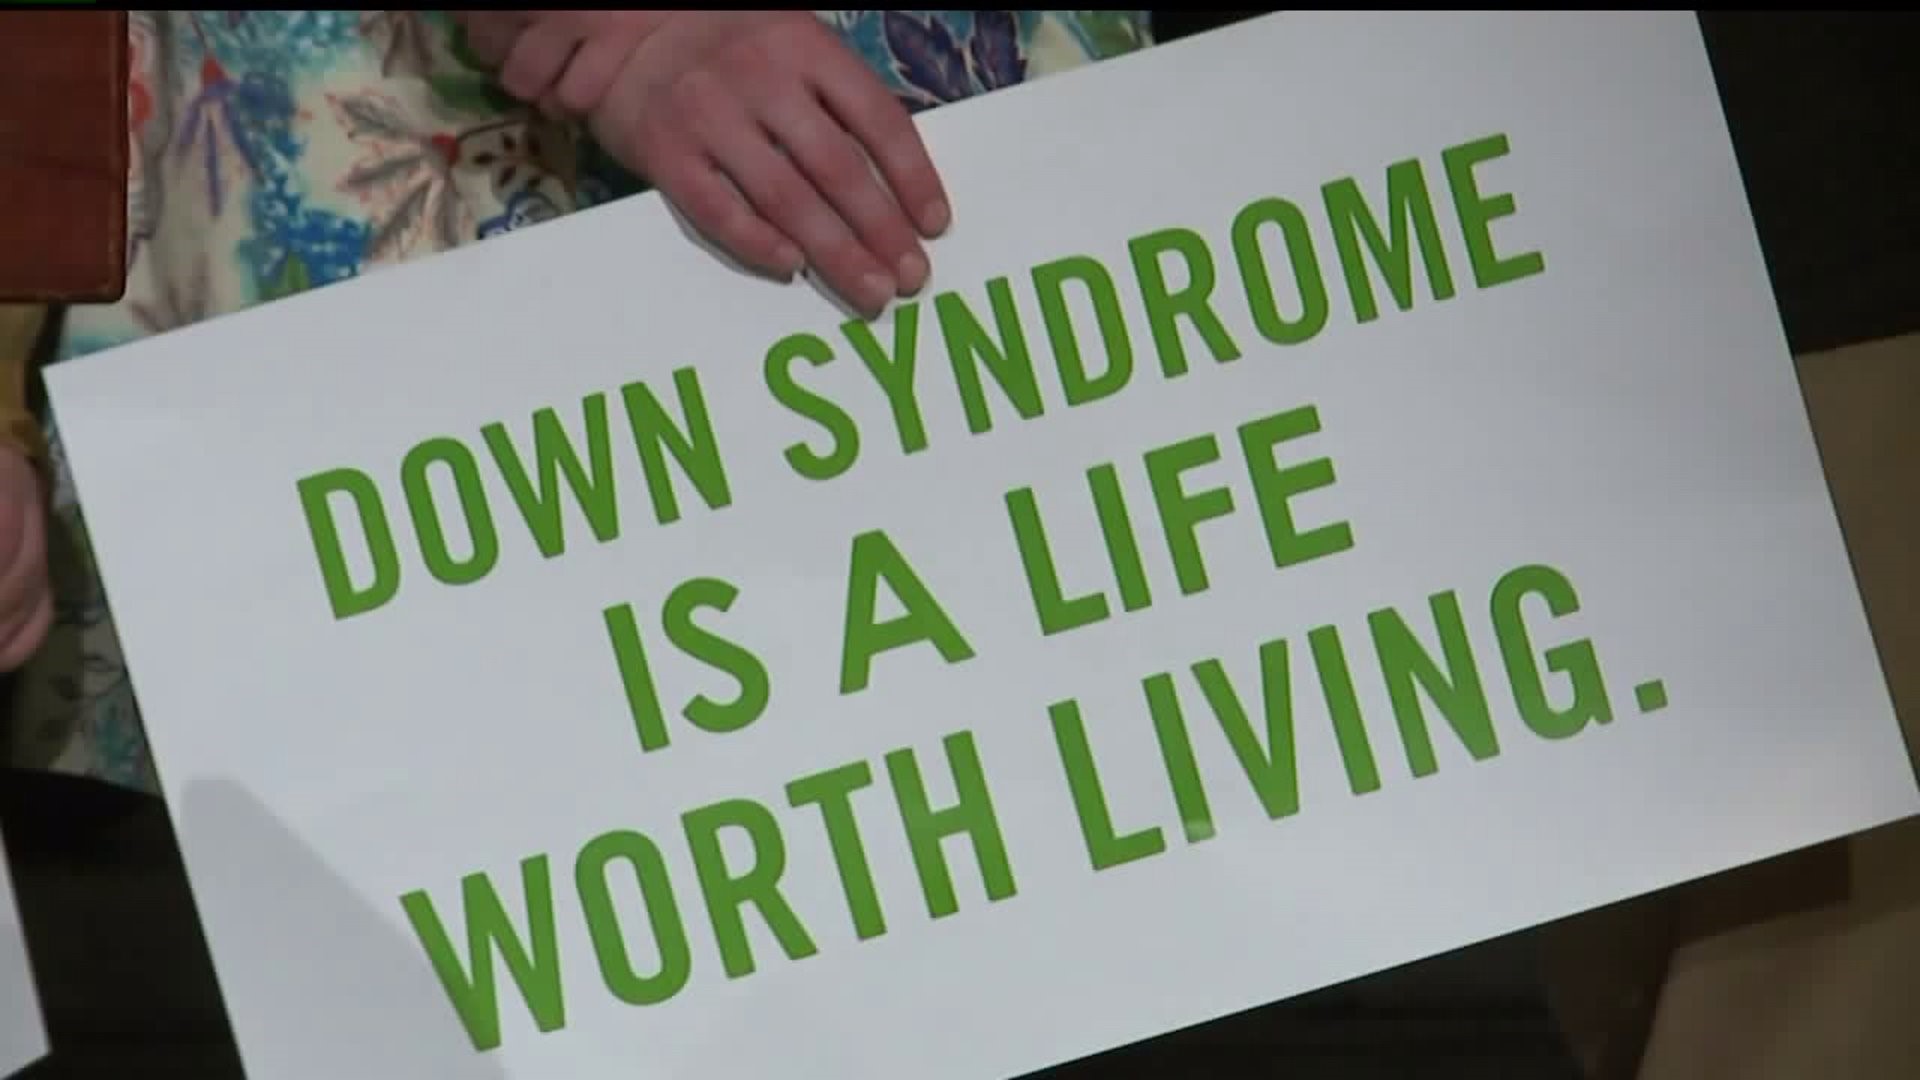 PA House, Senate bills seek to outlaw abortions based on Down syndrome diagnosis